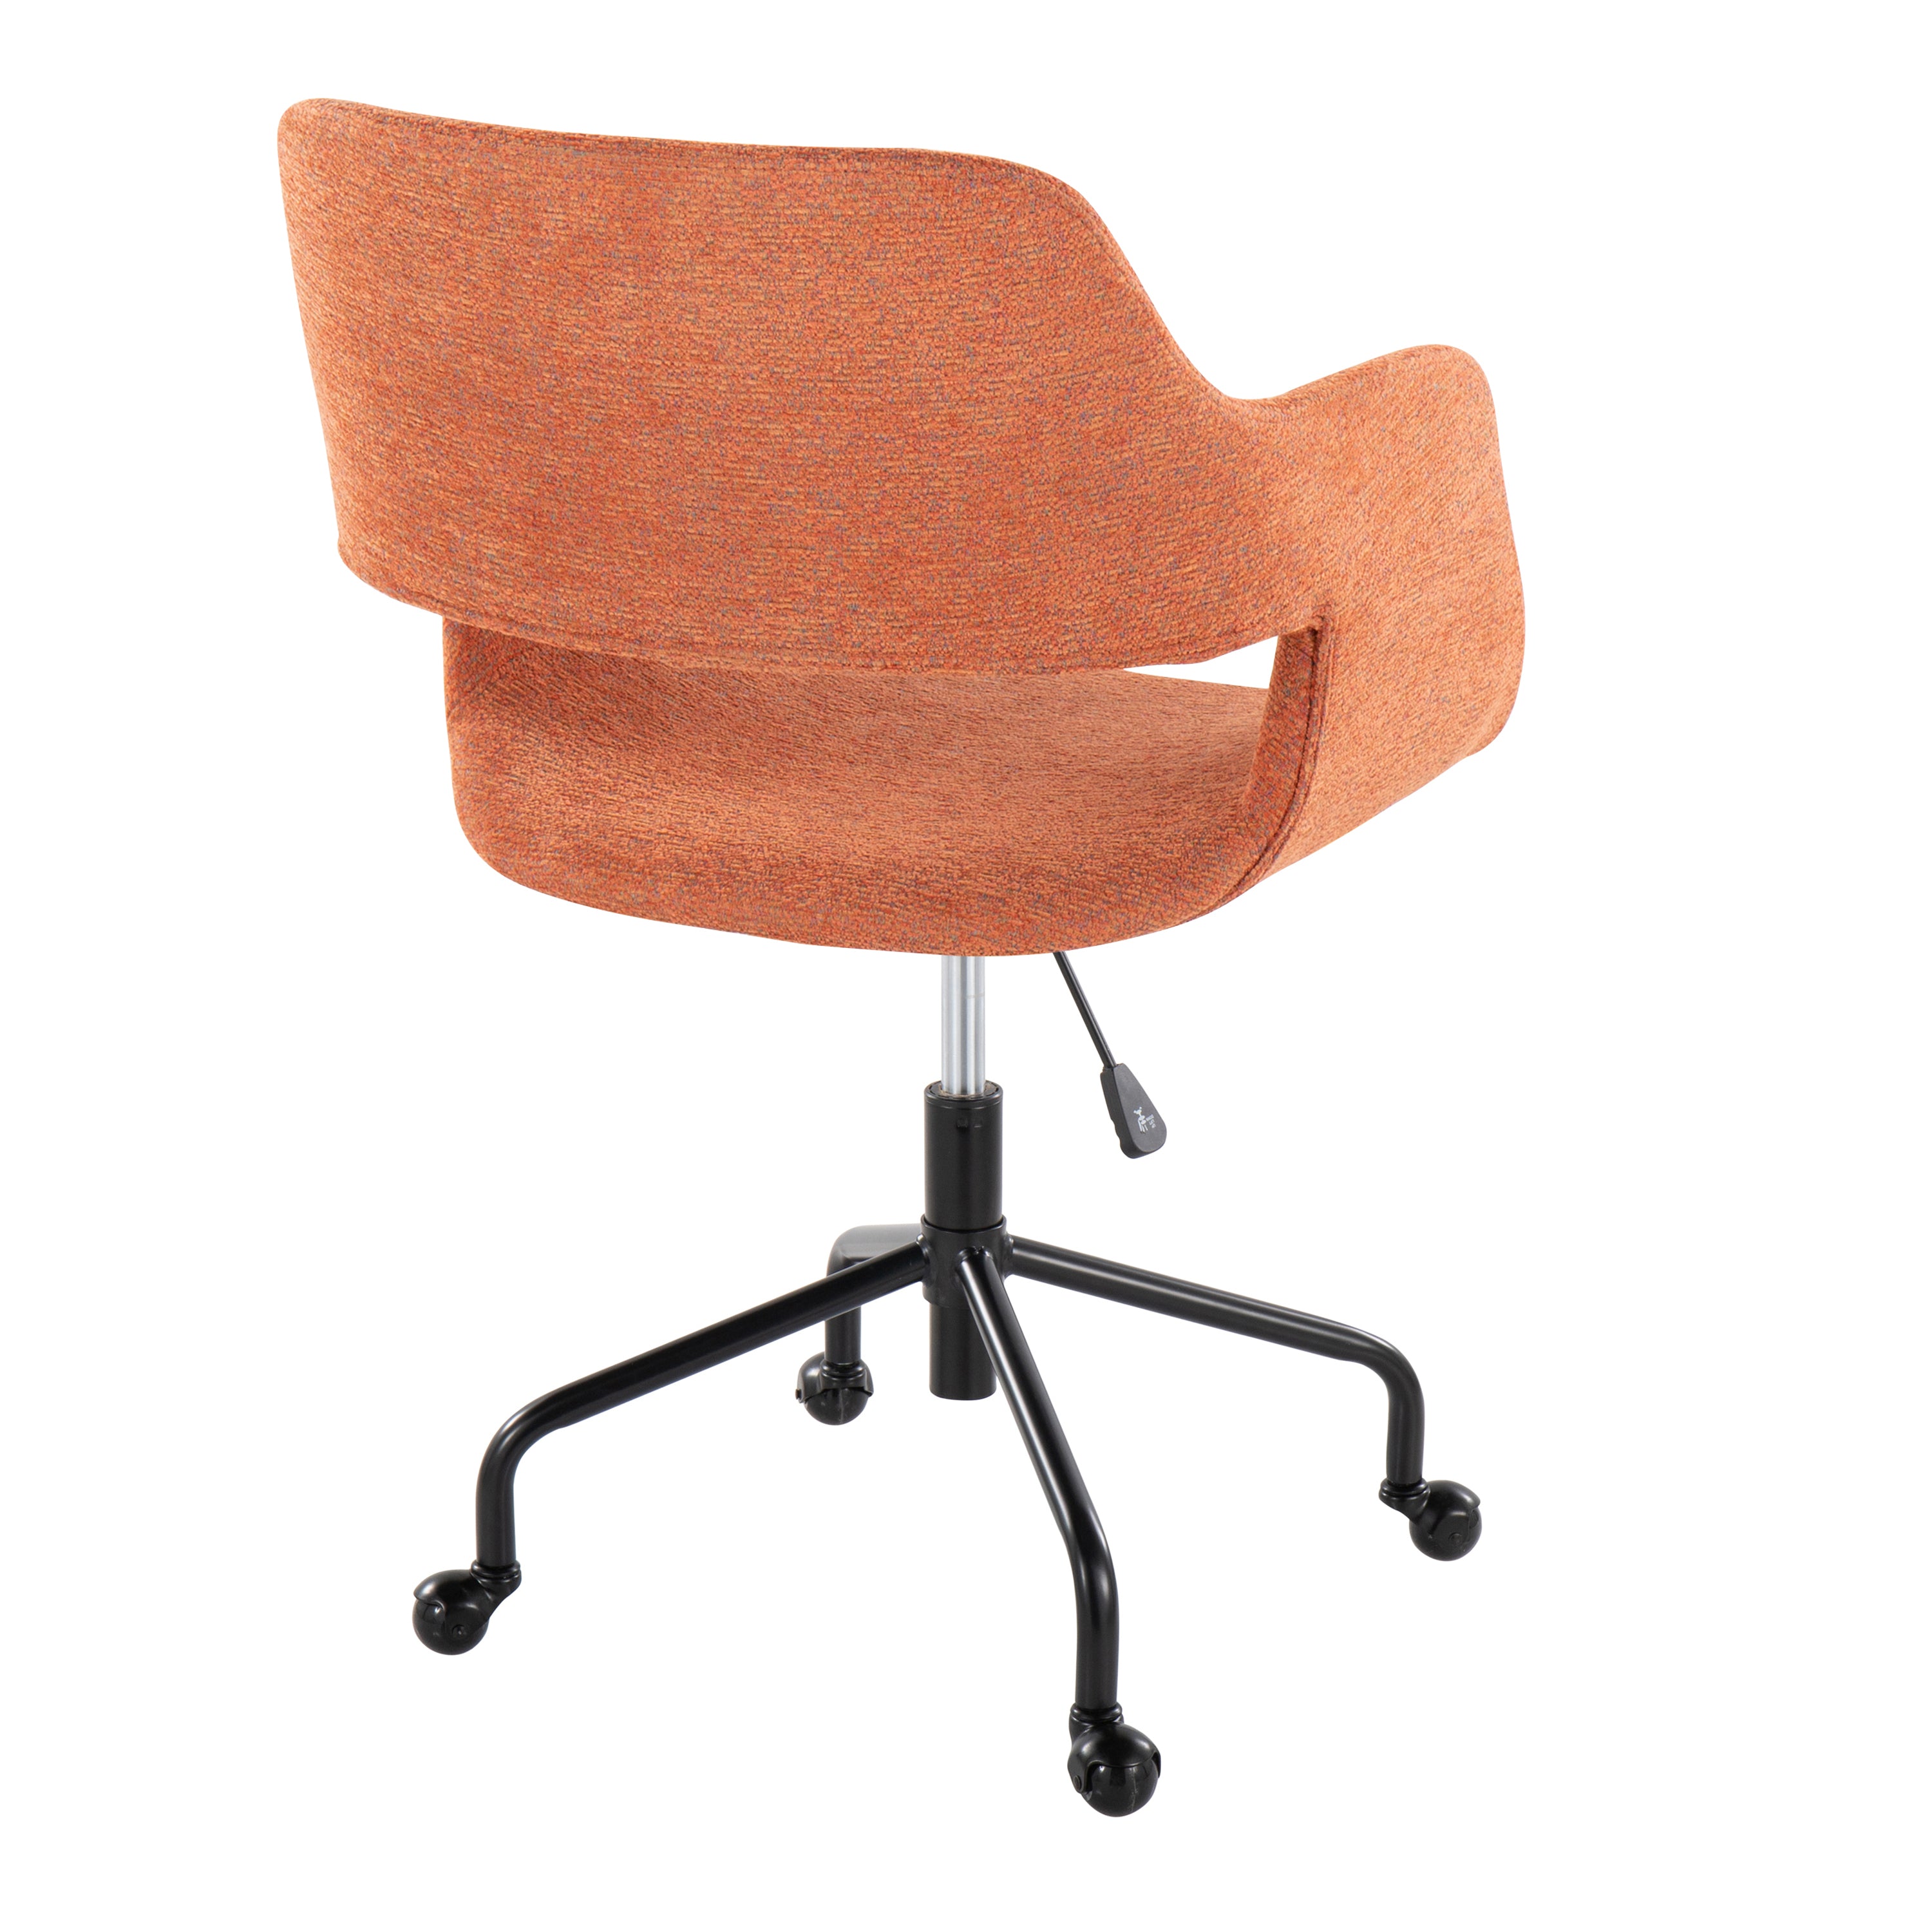 Contemporary Adjustable Office Chair - Black Metal and Orange Fabric